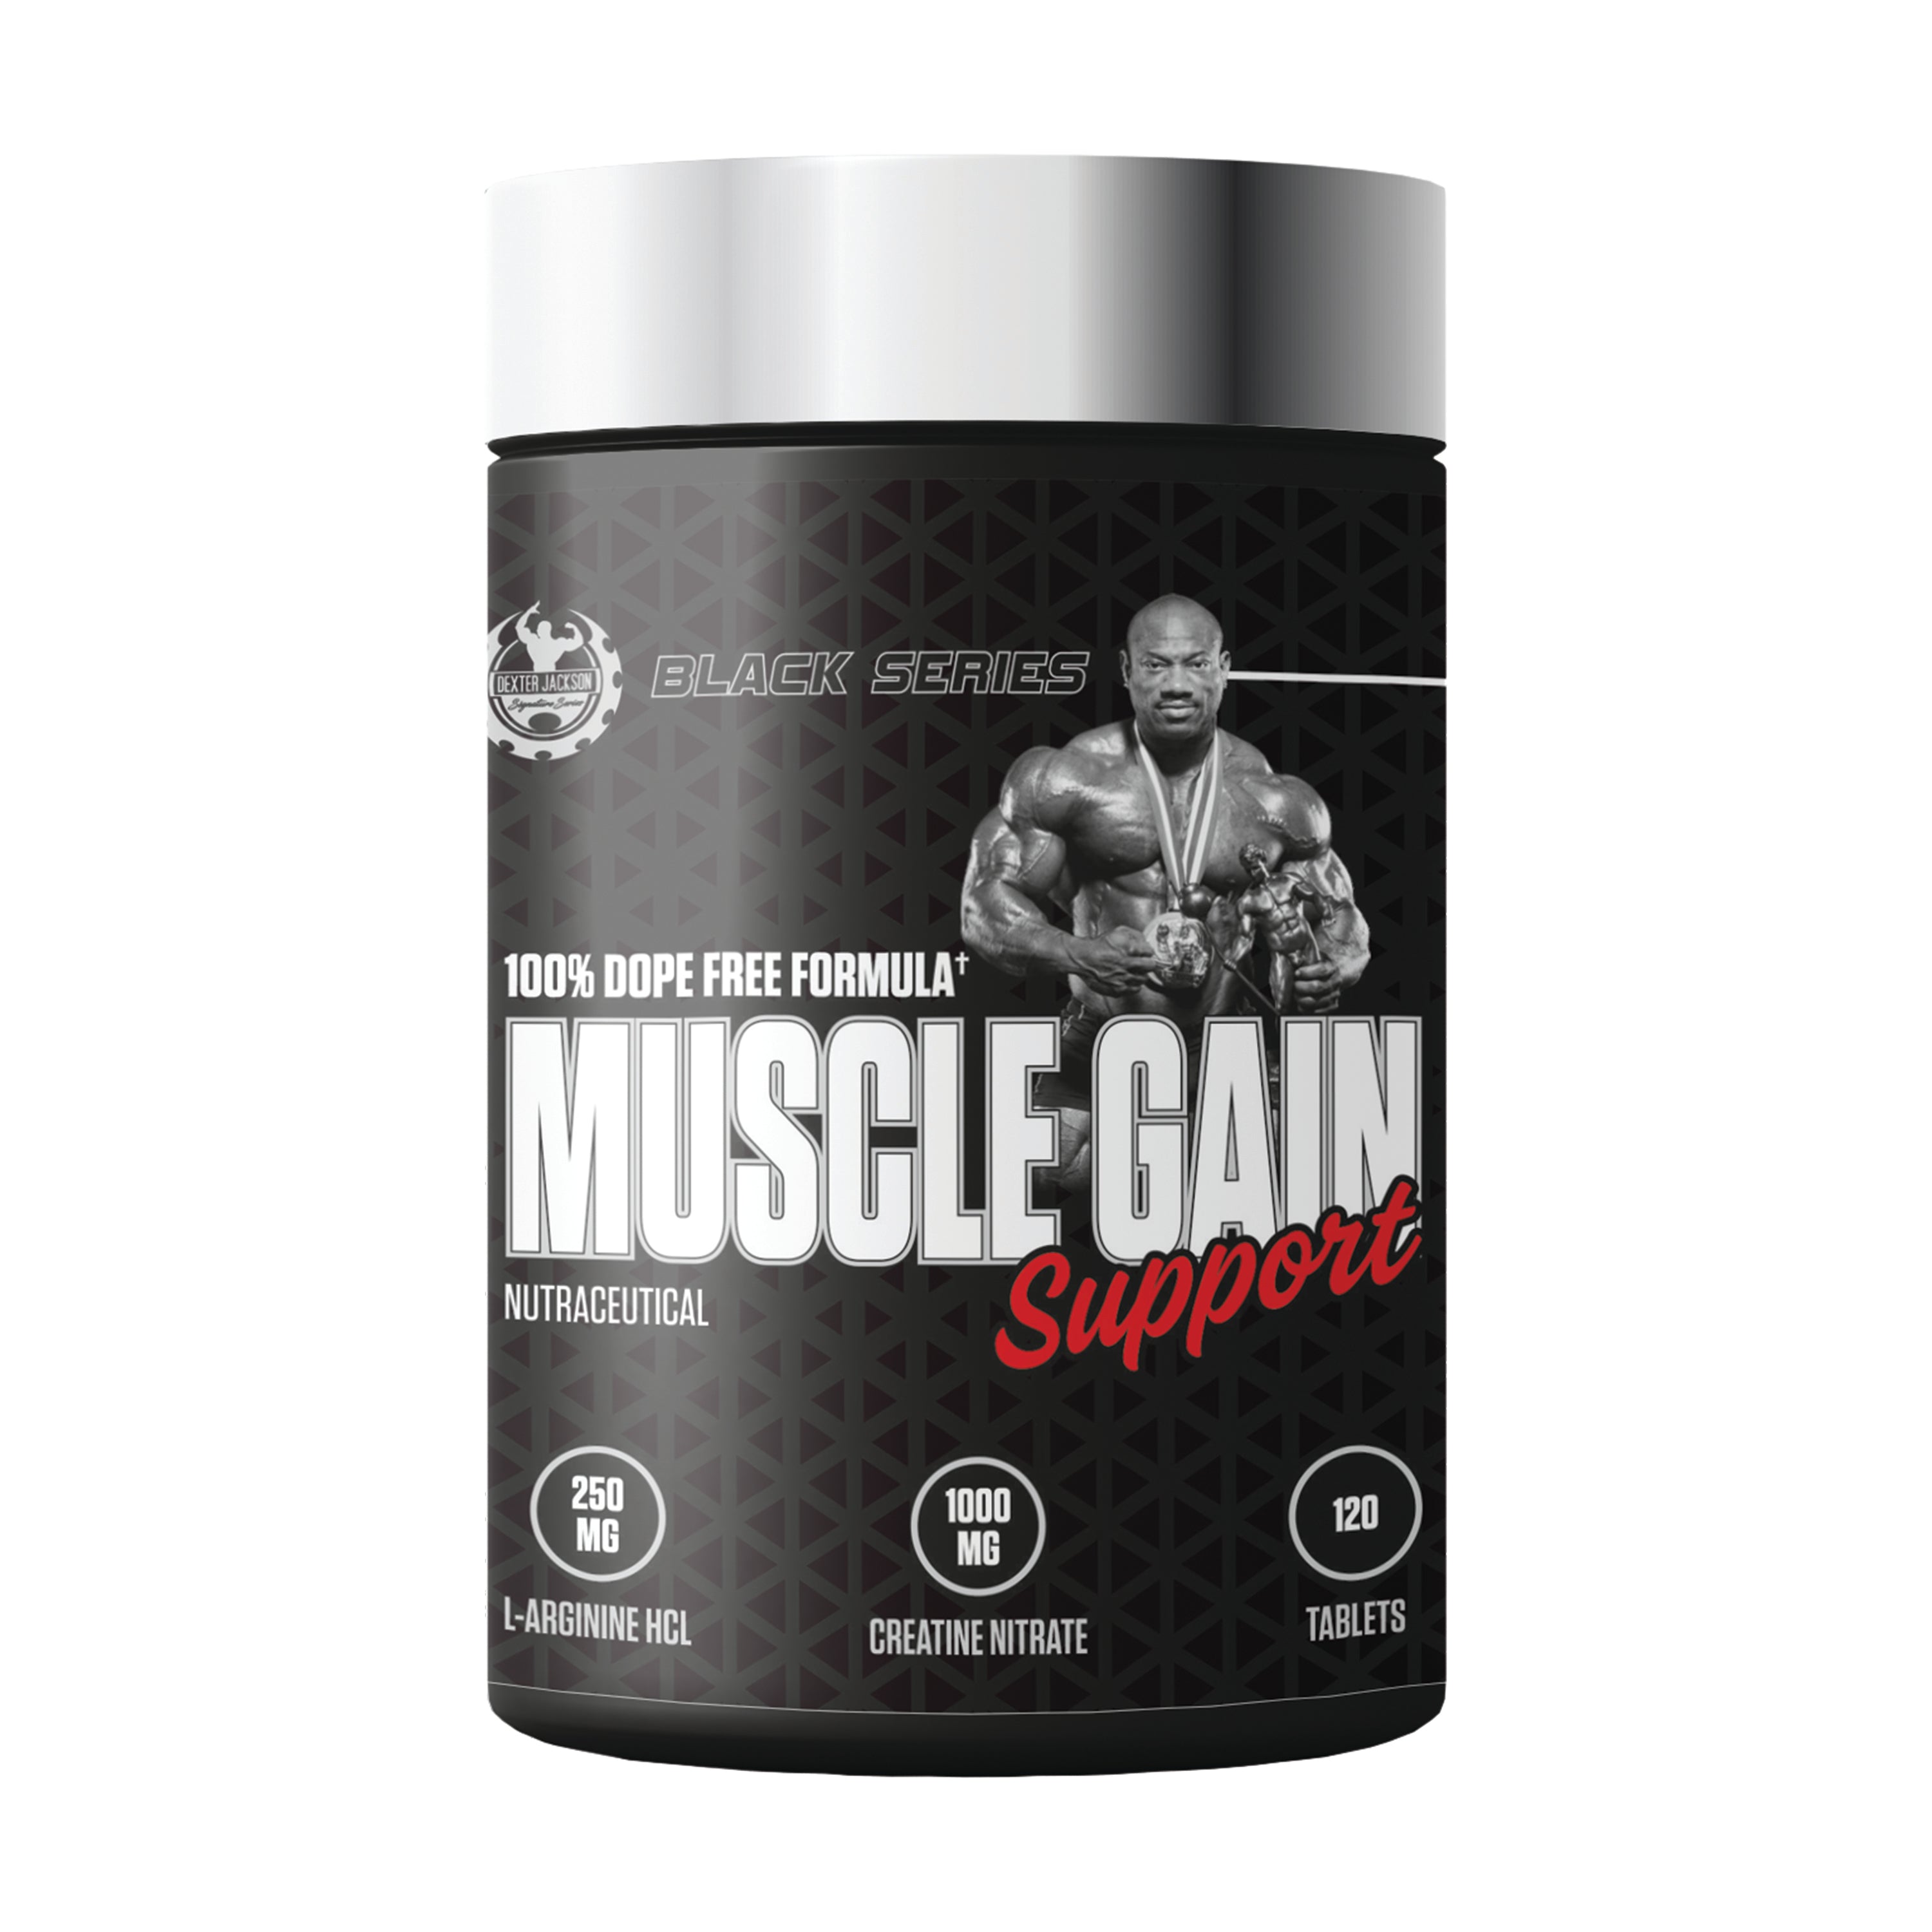 DJSS BLACK SERIES MUSCLE GAIN SUPPORT 120 TABLETS